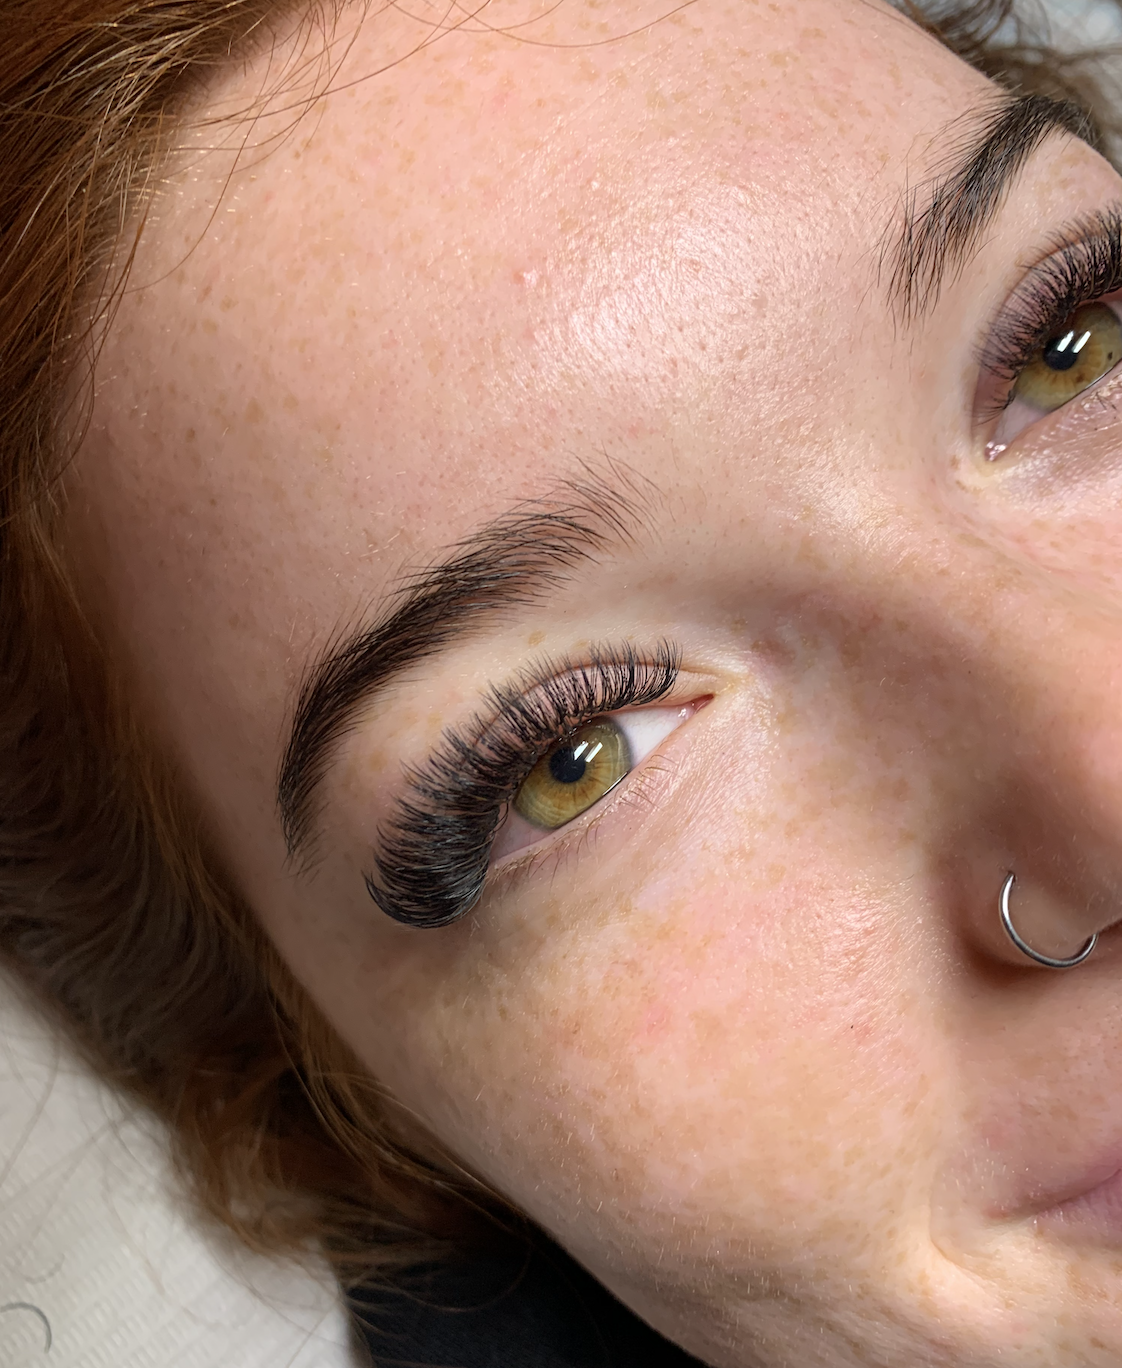 Volume Set of lashes done in Bothell, Washington. This is a cat eye shape using D curl 